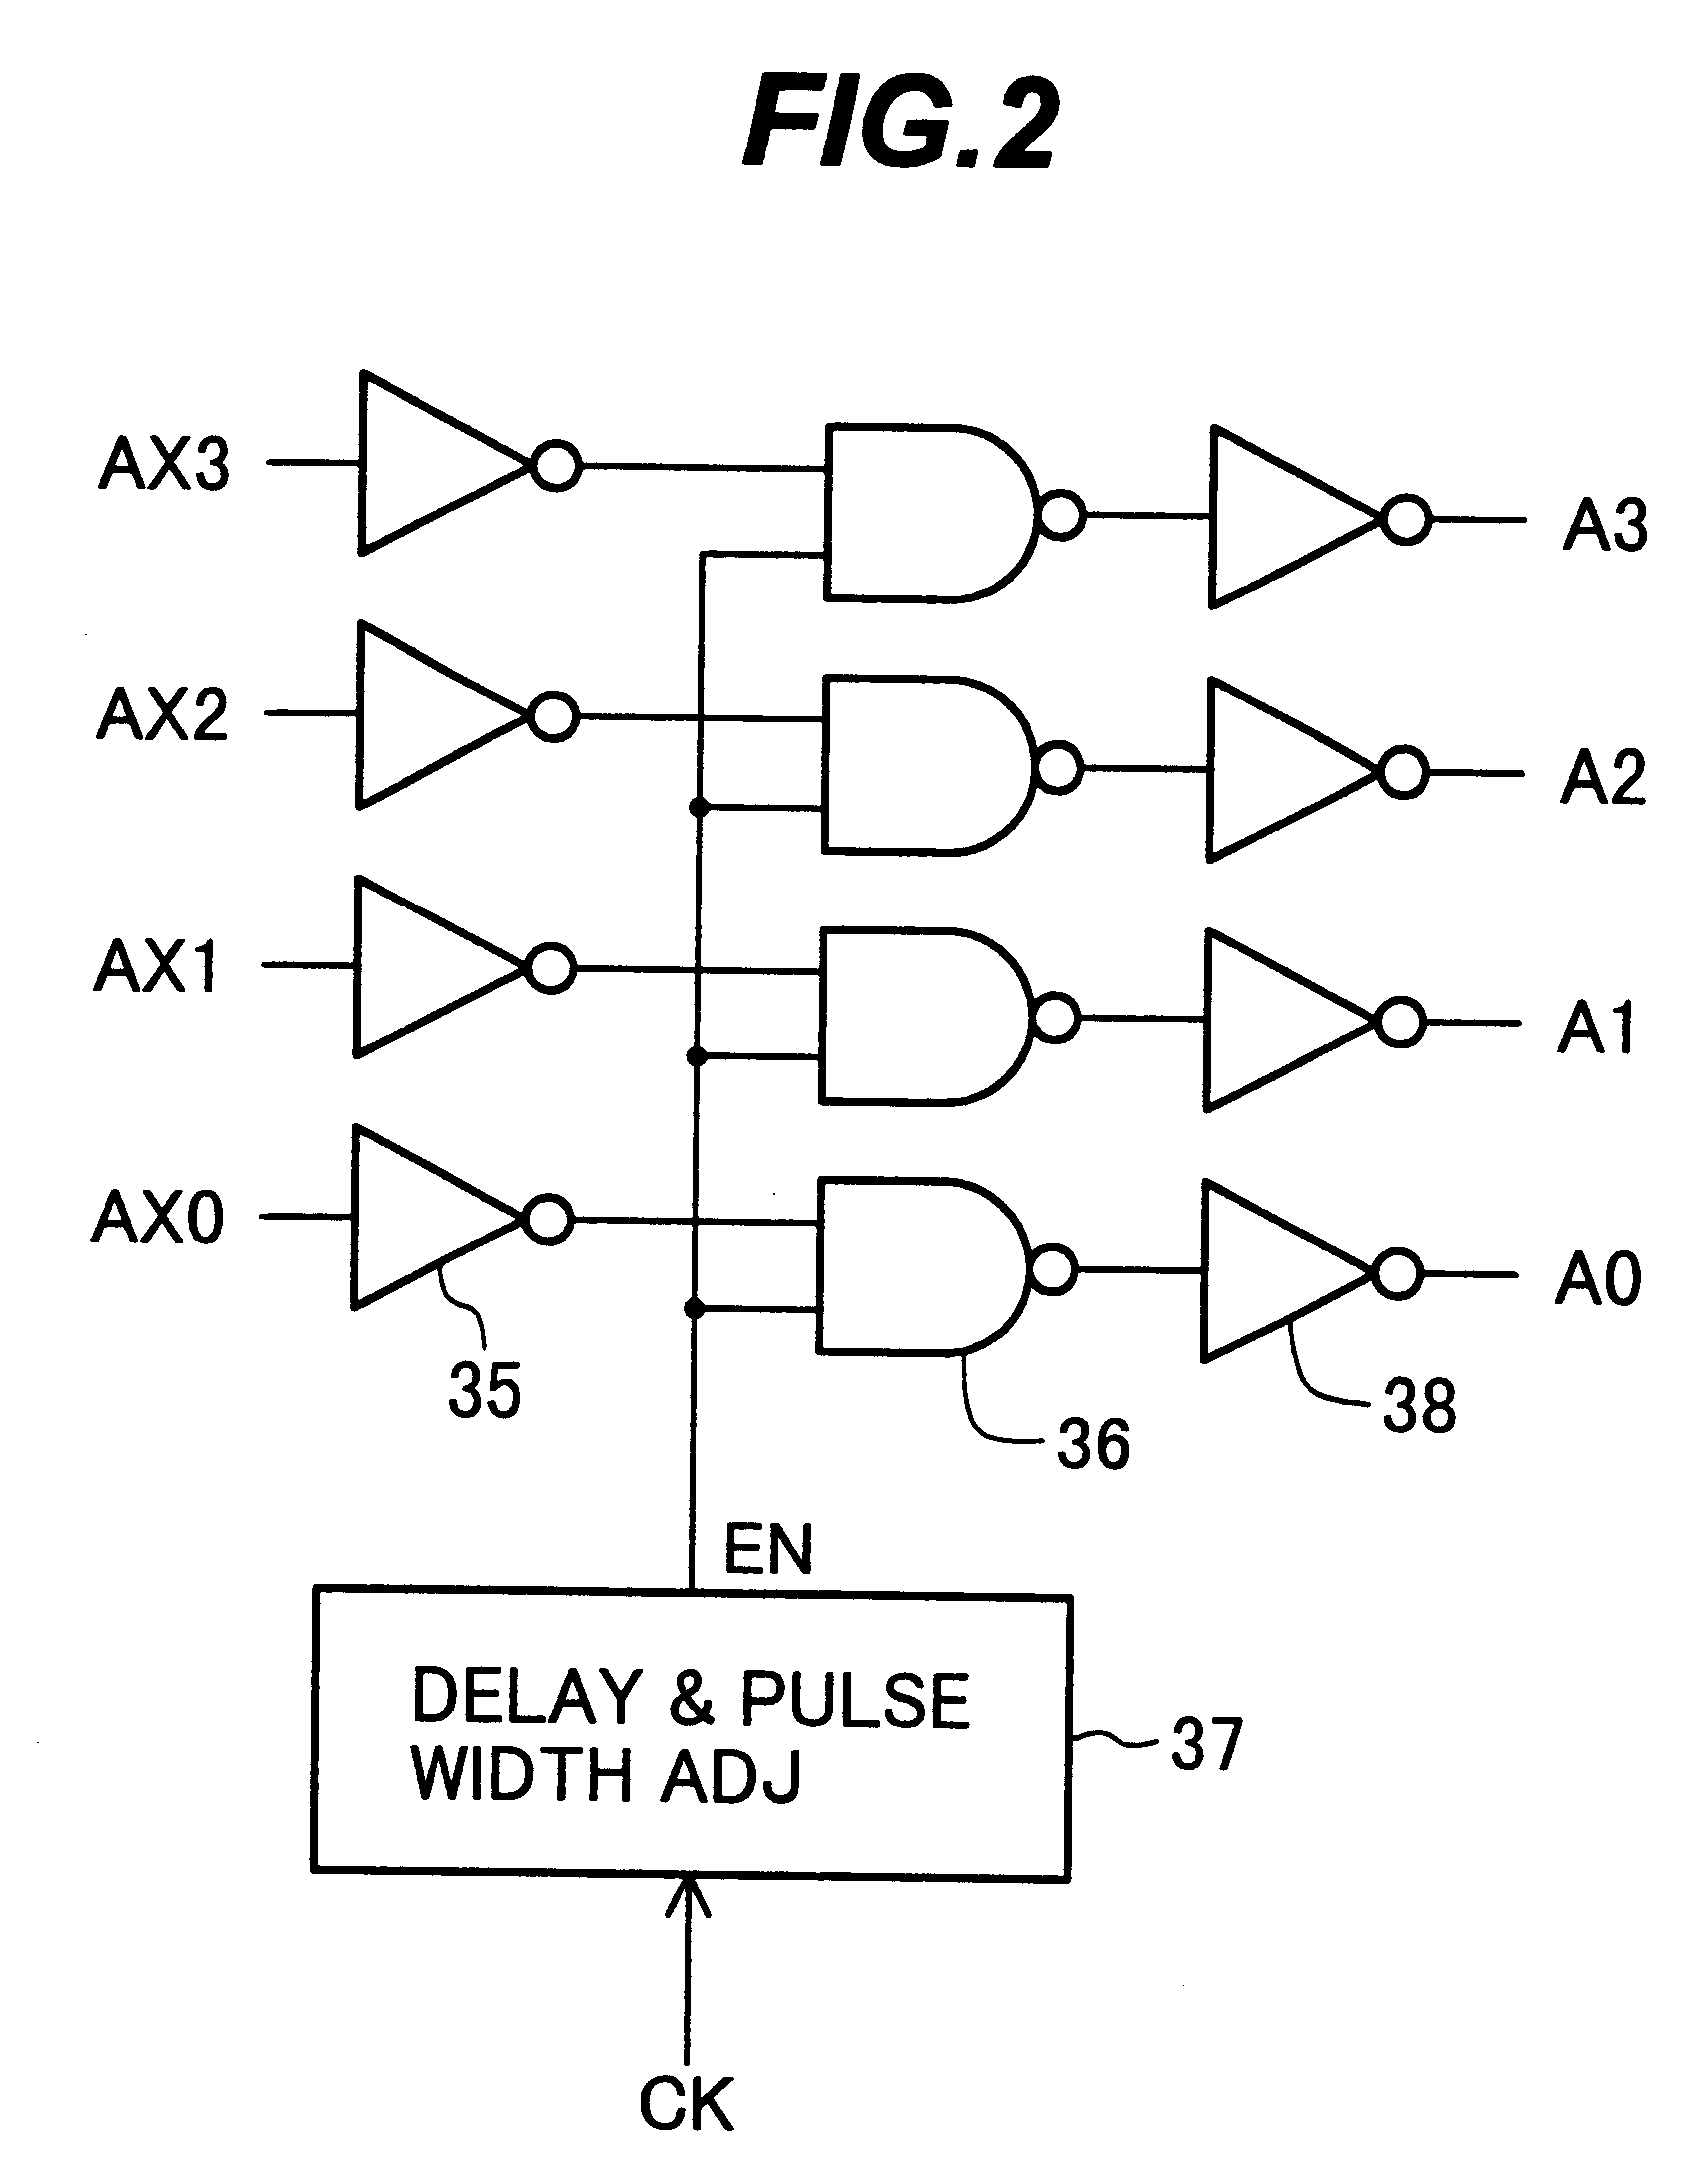 Semiconductor memory equipped with row address decoder having reduced signal propagation delay time